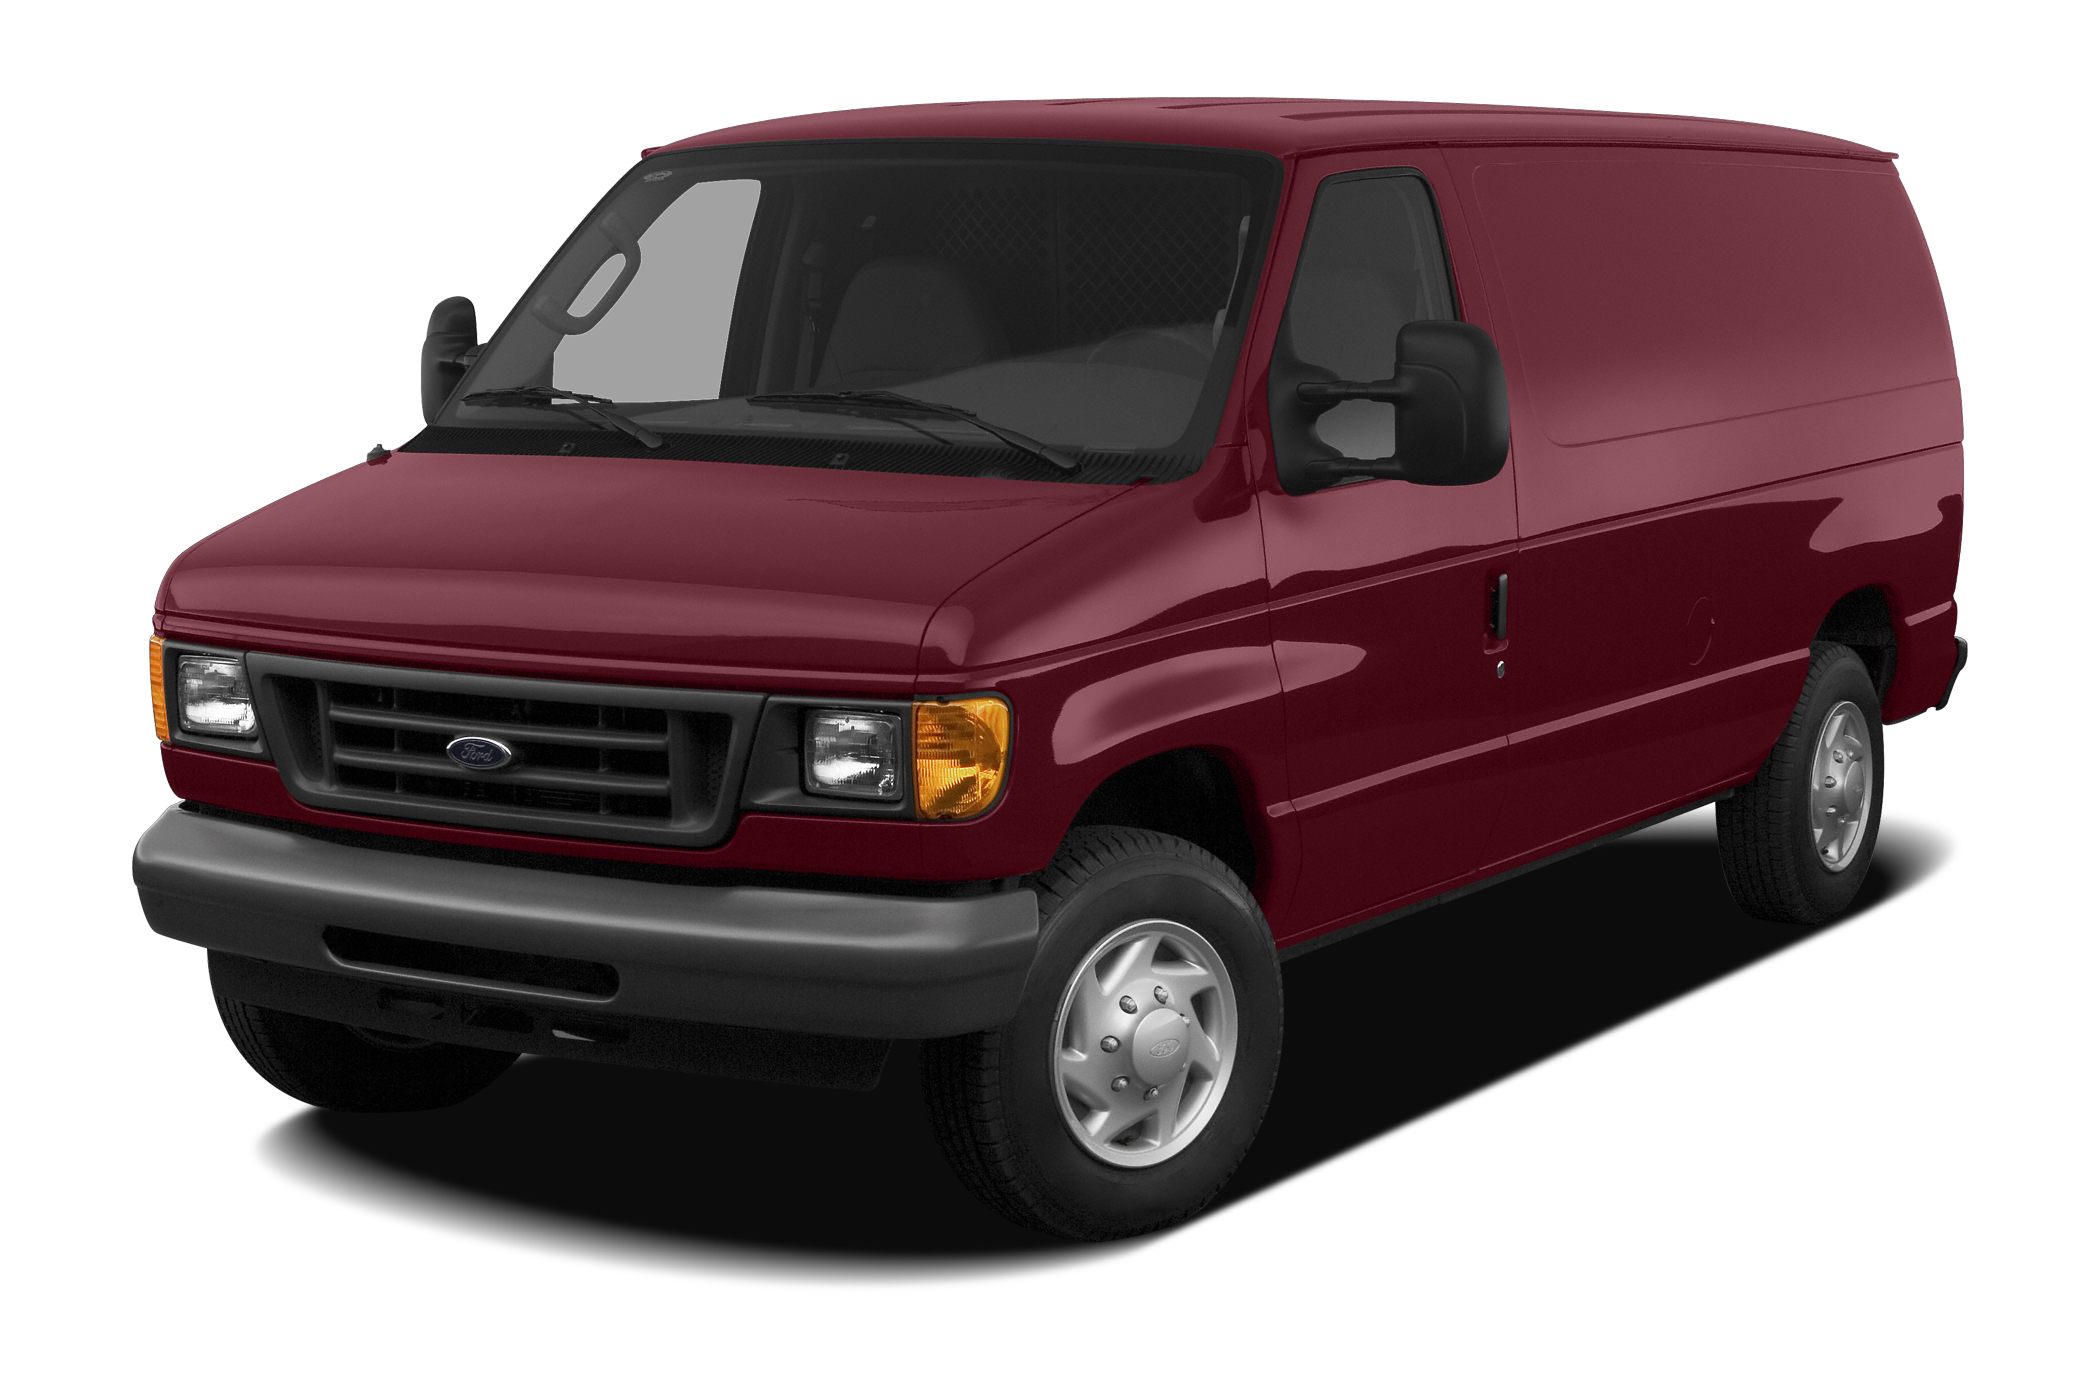 07 Ford E 350 Super Duty Commercial Cargo Van Specs And Prices